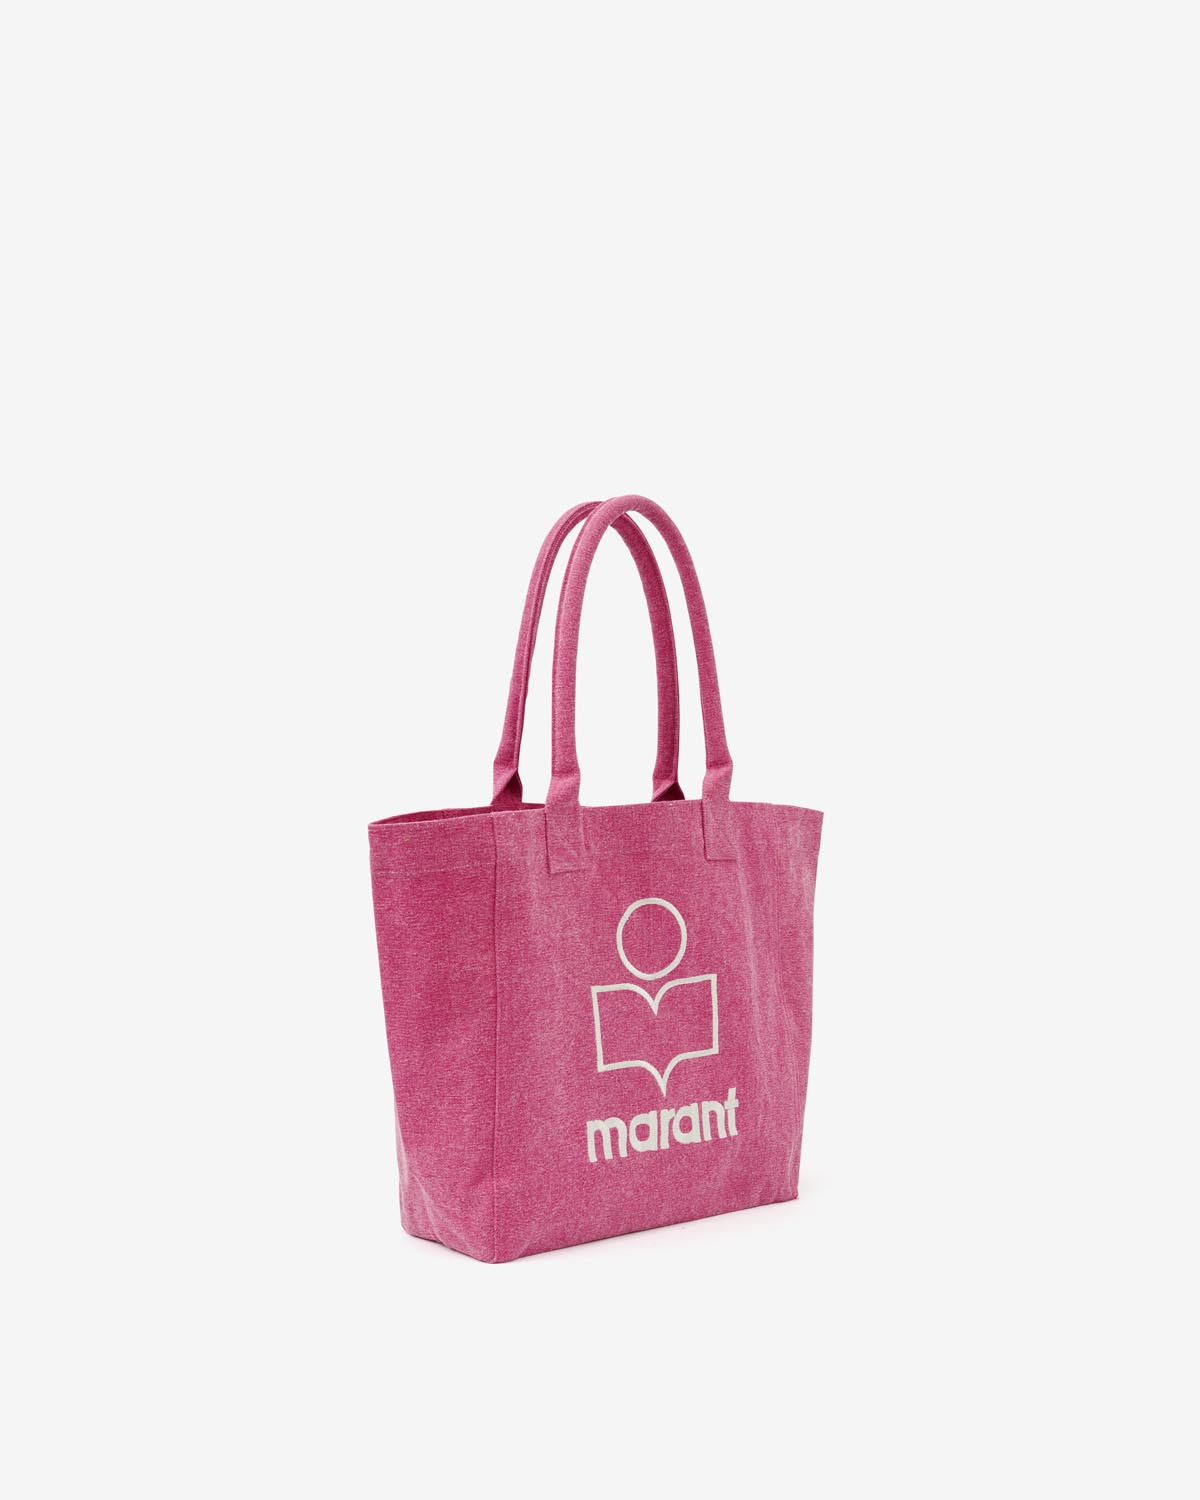 Tote bag yenky small Woman Rosa 9